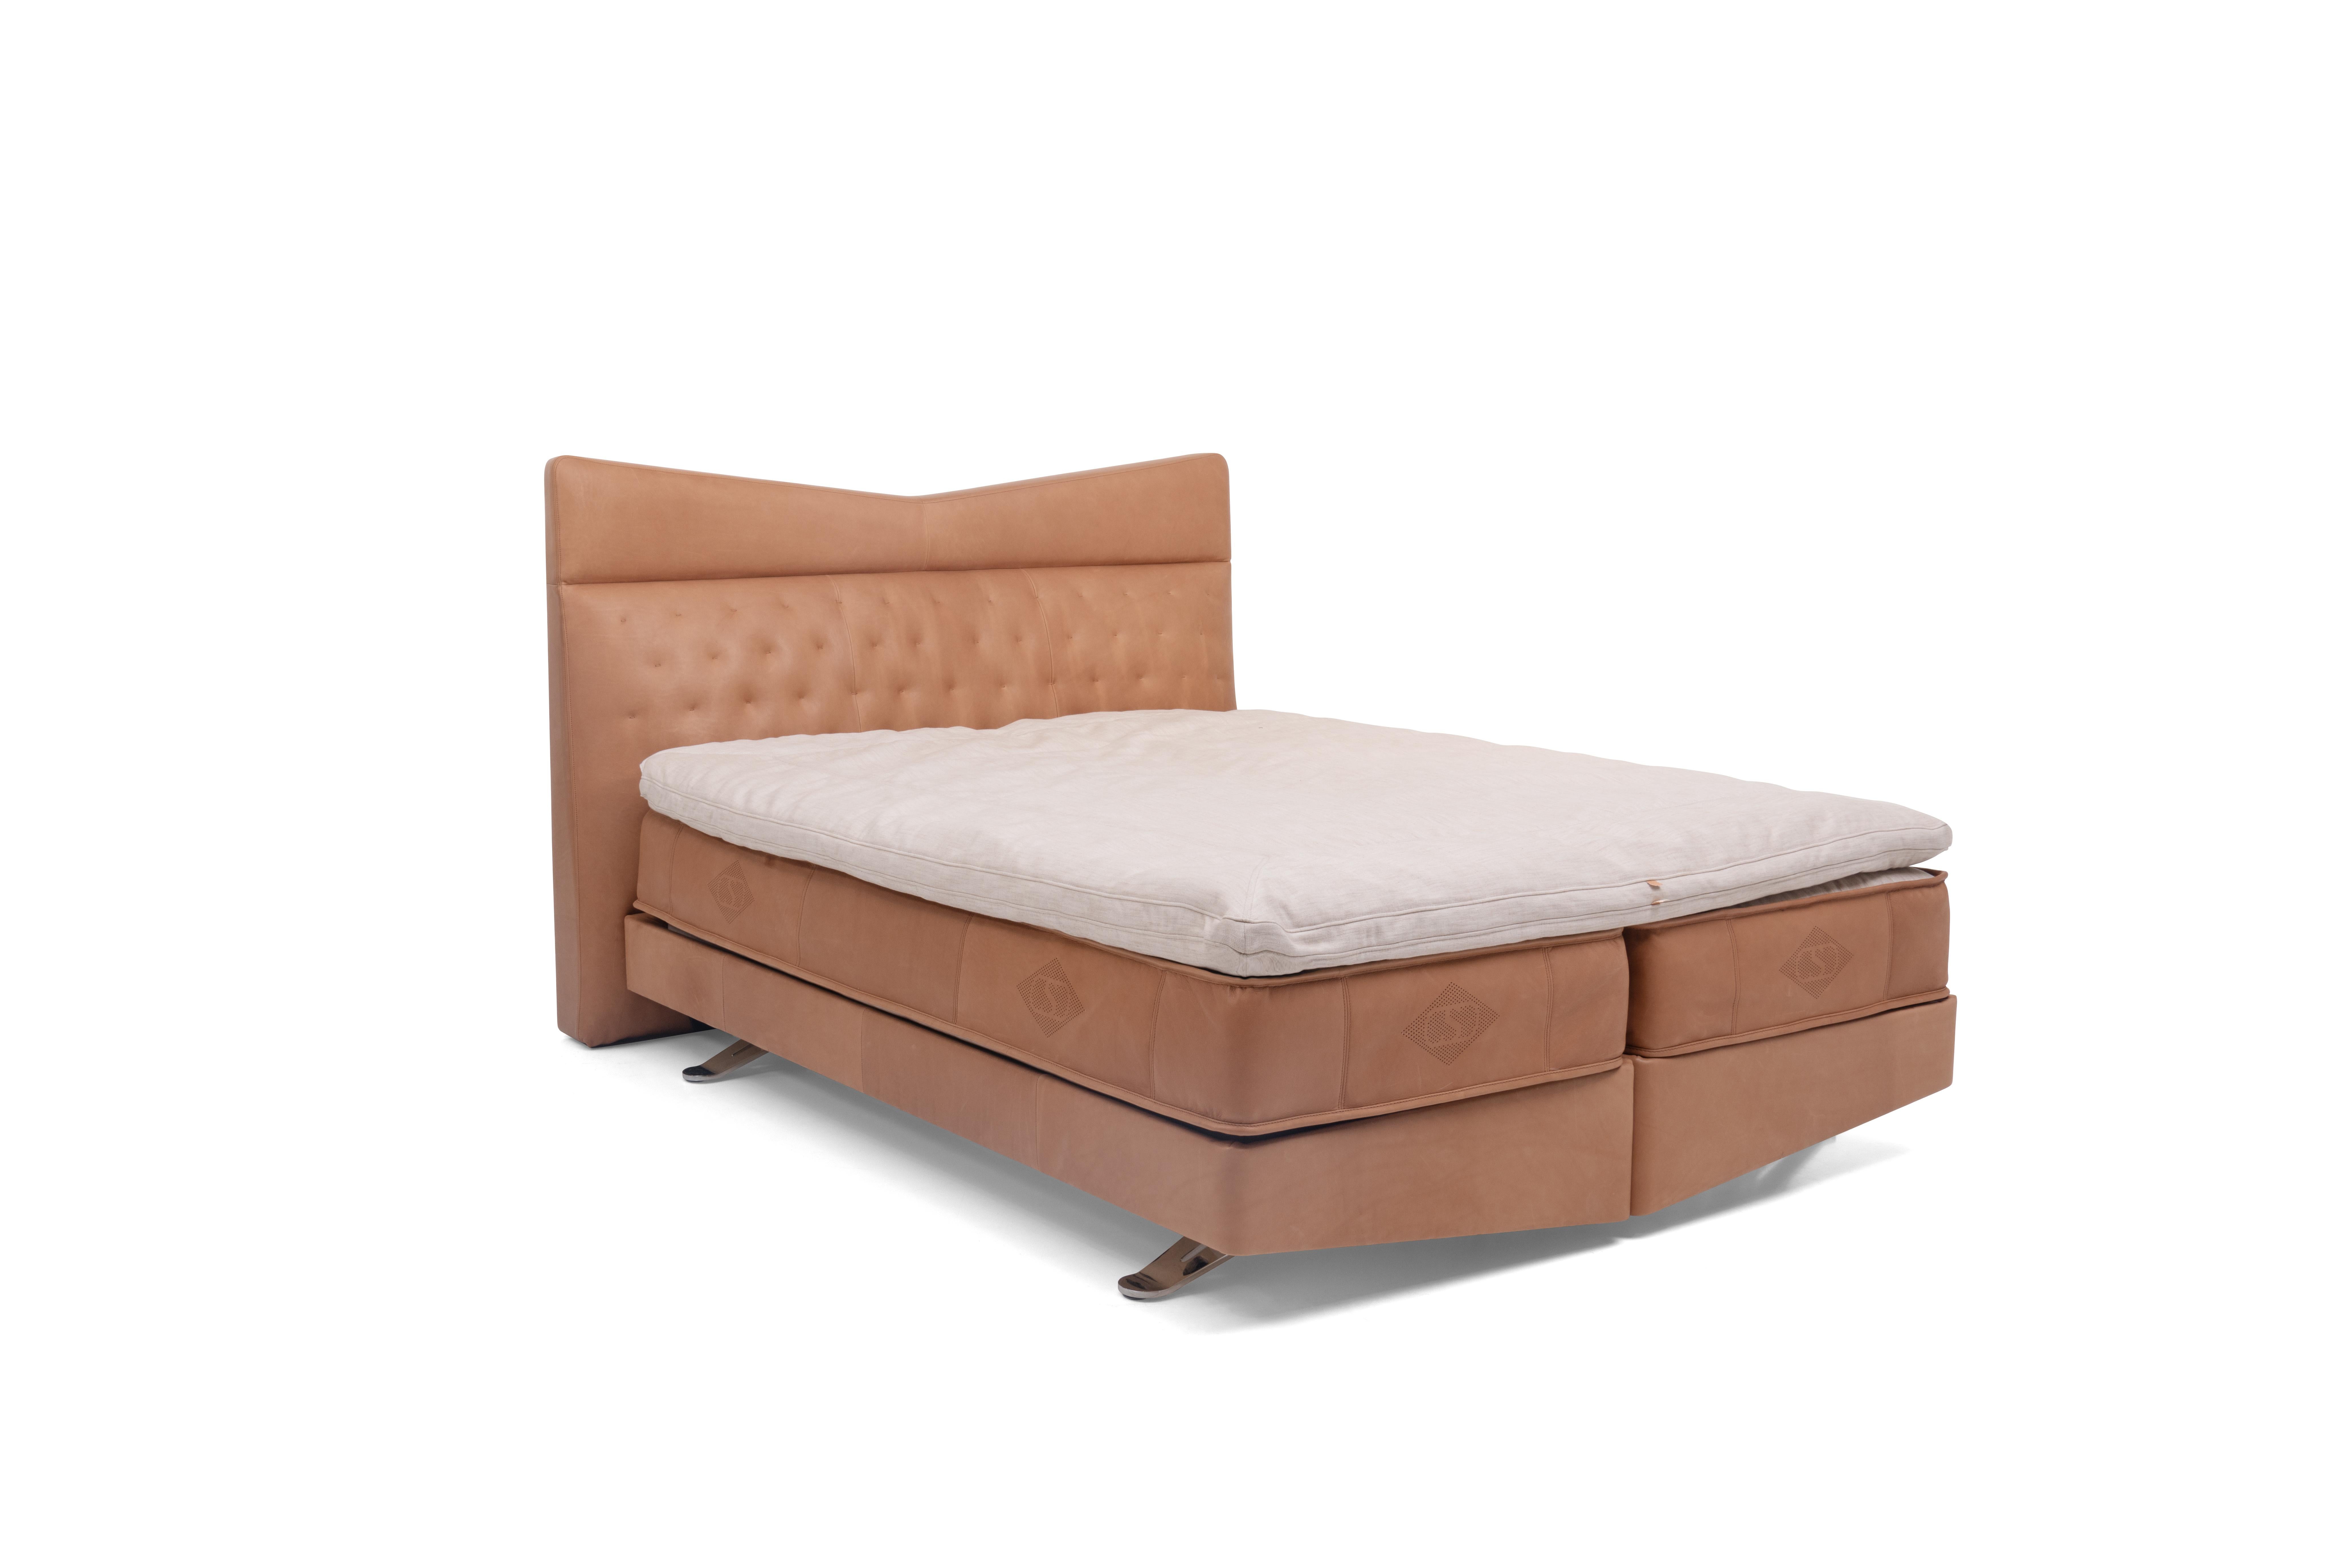 DS-1151 bed by De Sede
Dimensions: D 220 x W 140 x H 29 cm
Materials: SEDEX upholstery covered with wadding. 
Compact frame made of panel materials and strapped to seat frame.
Cushions filled with spelt chaff and latex for combined support and